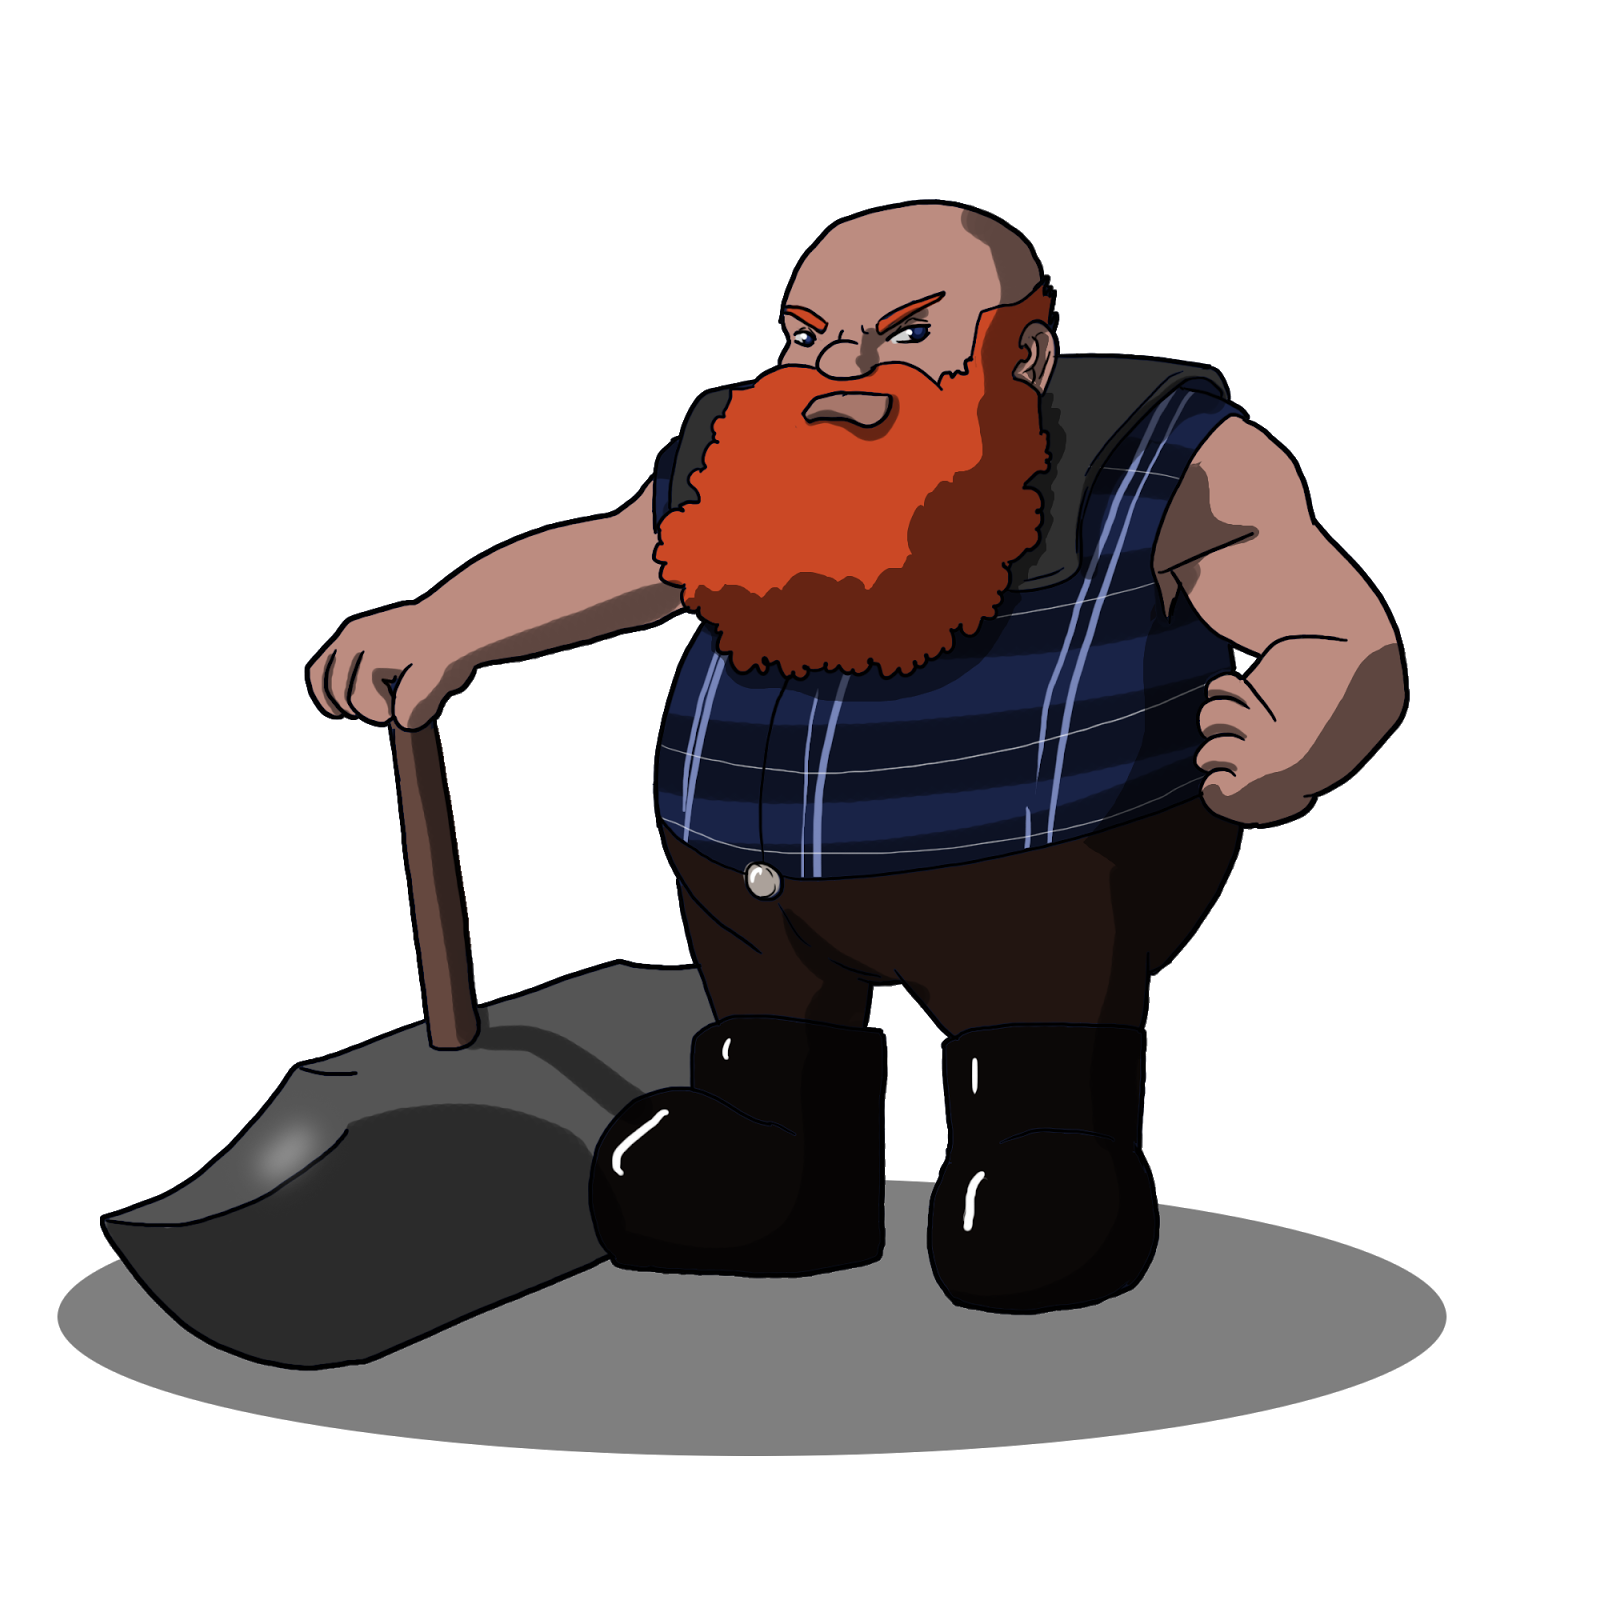 janitor clipart commoner